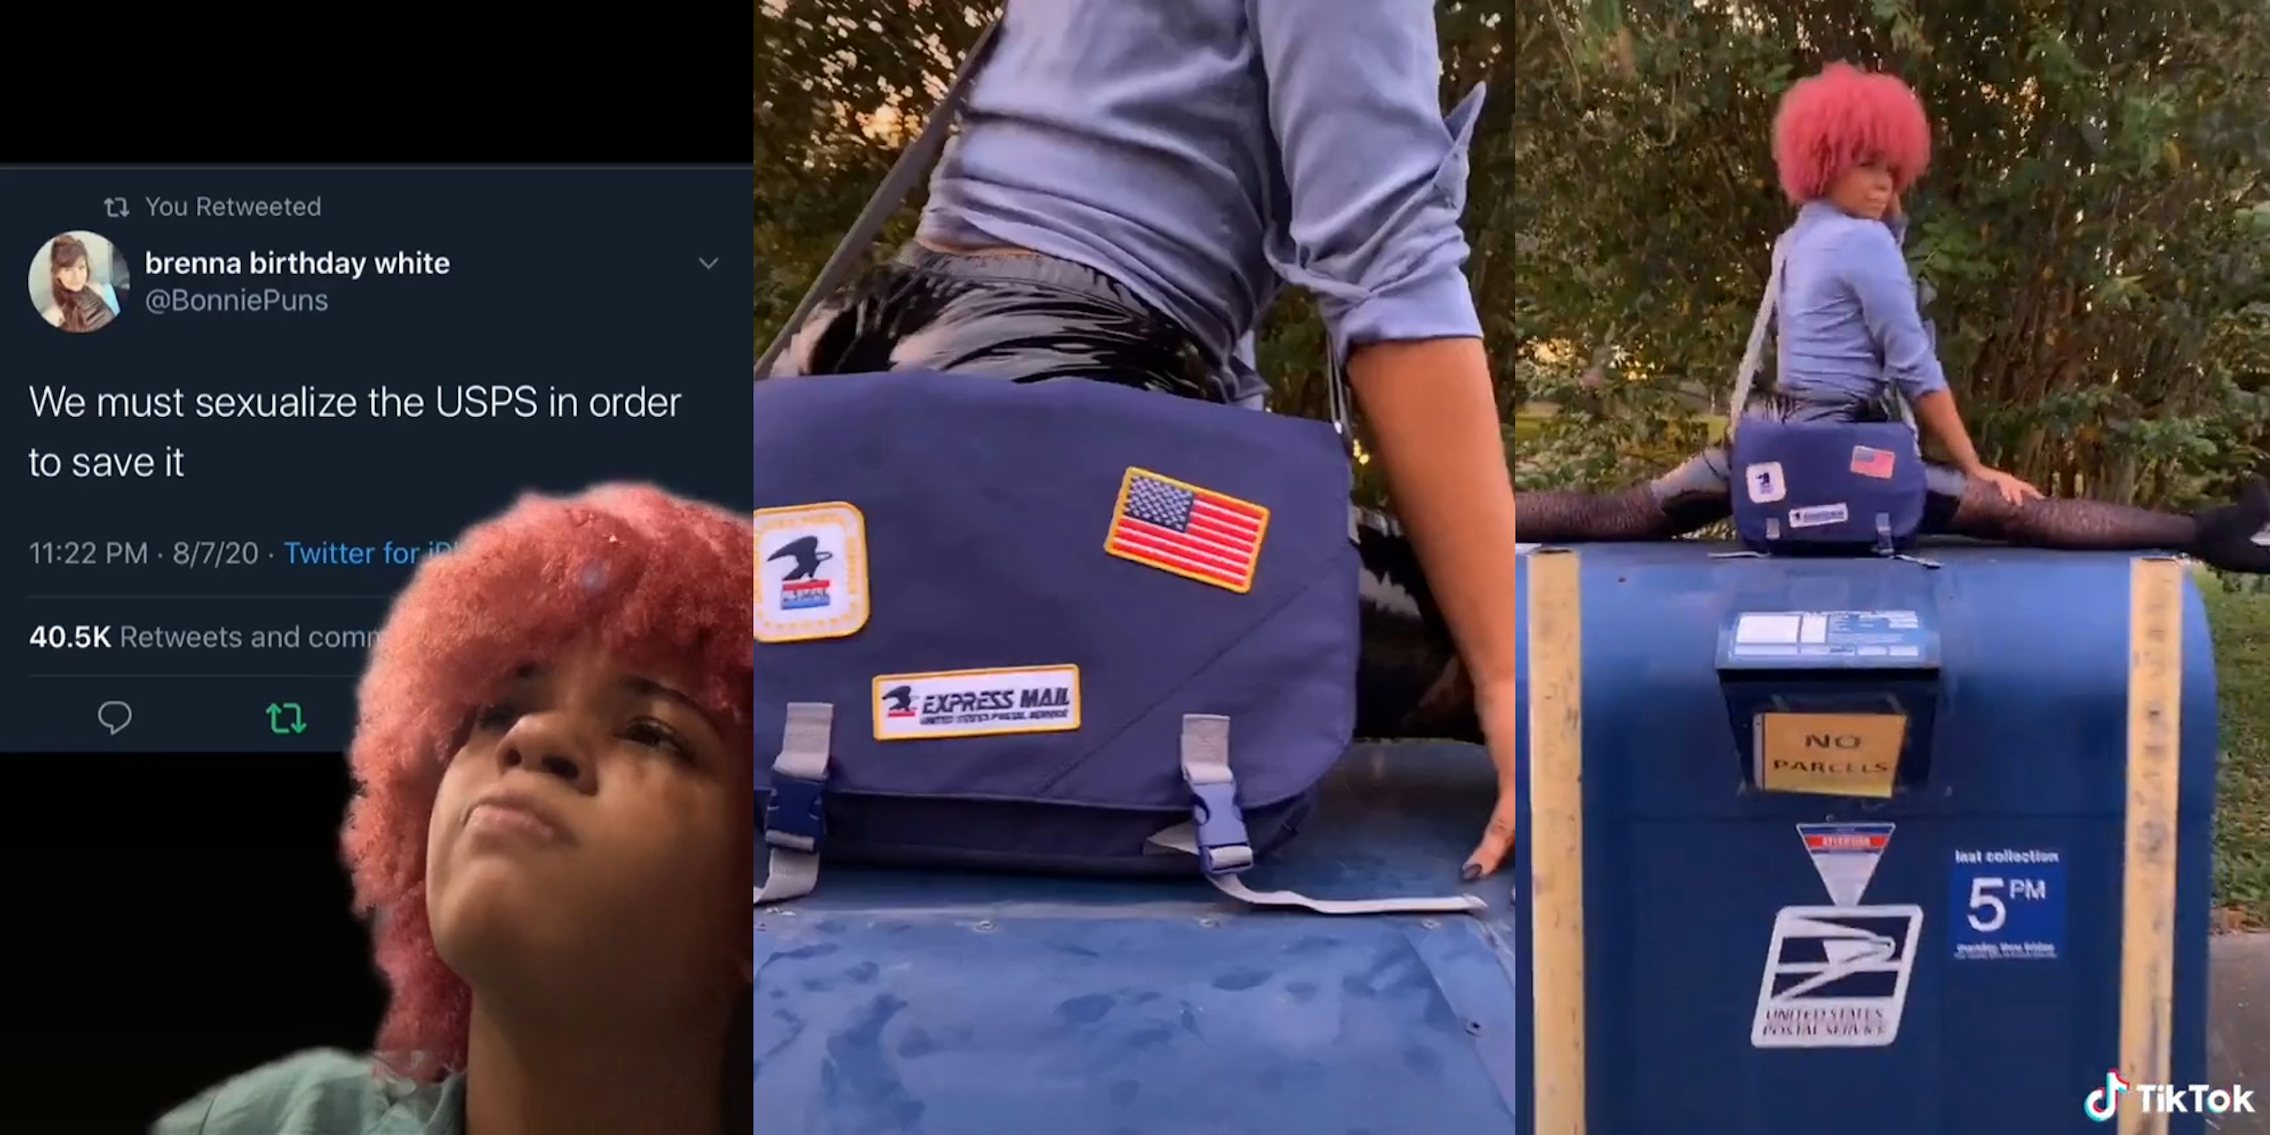 young woman dressed as sexy postal worker dancing on top of a mail box